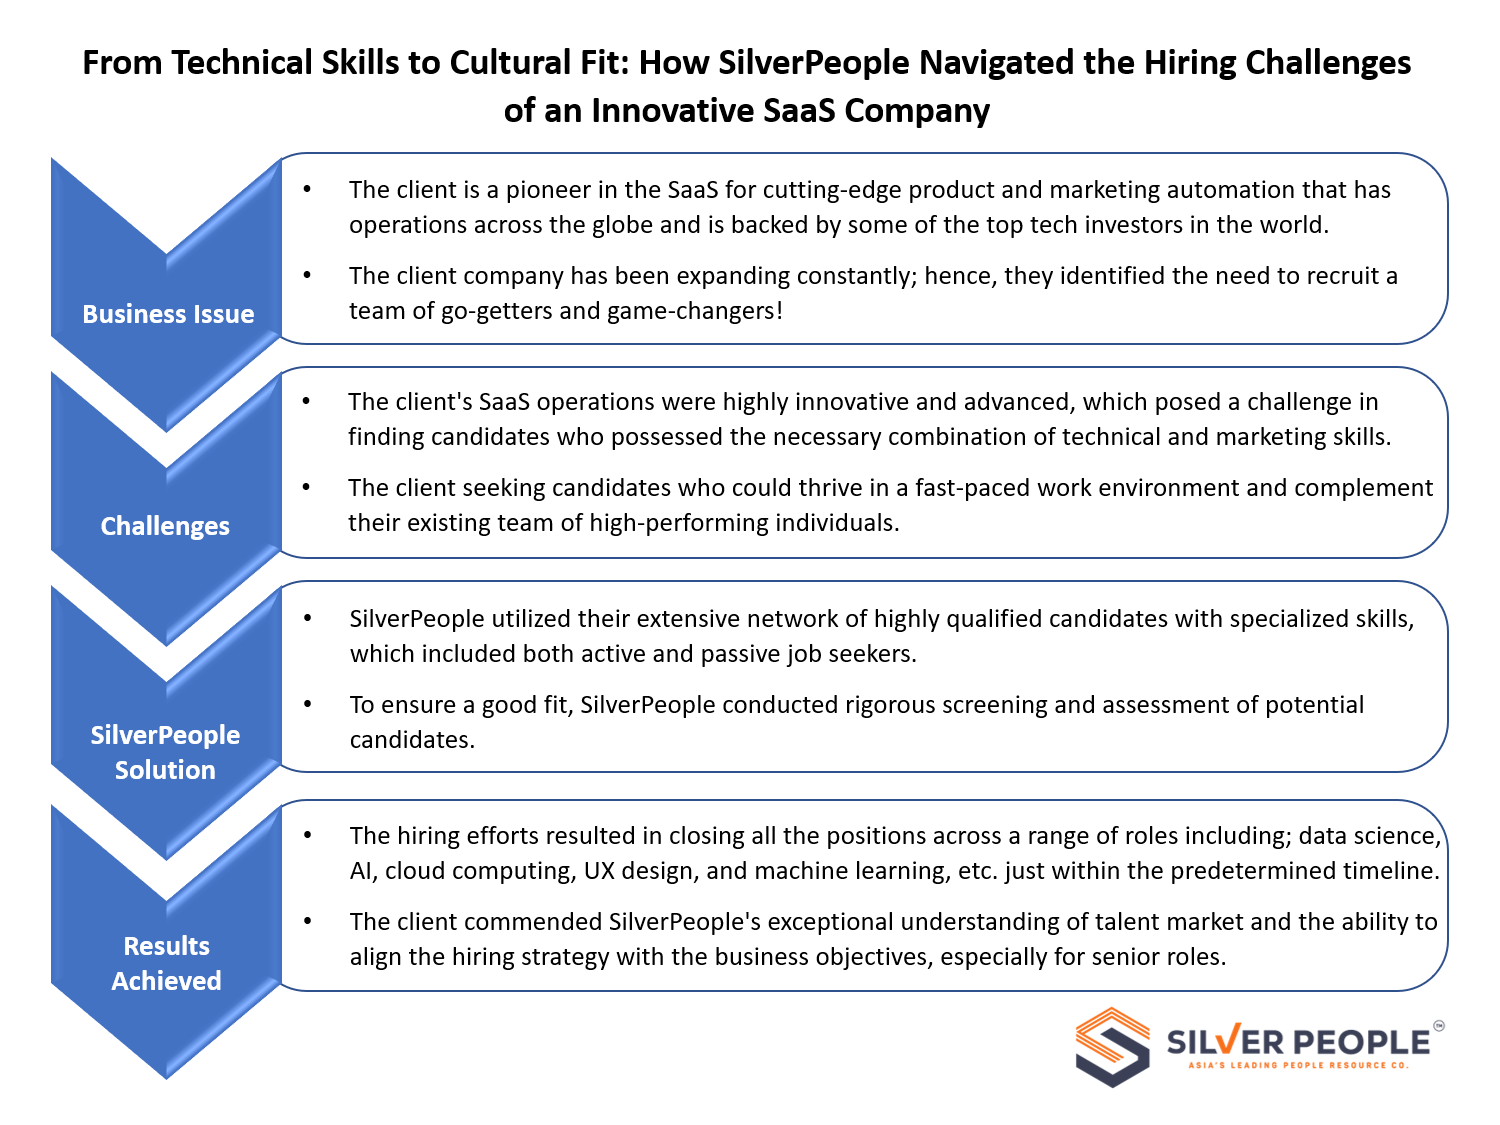 From Technical Skills to Cultural Fit - How SilverPeople Navigated the Hiring Challenges of an Innovative SaaS Company